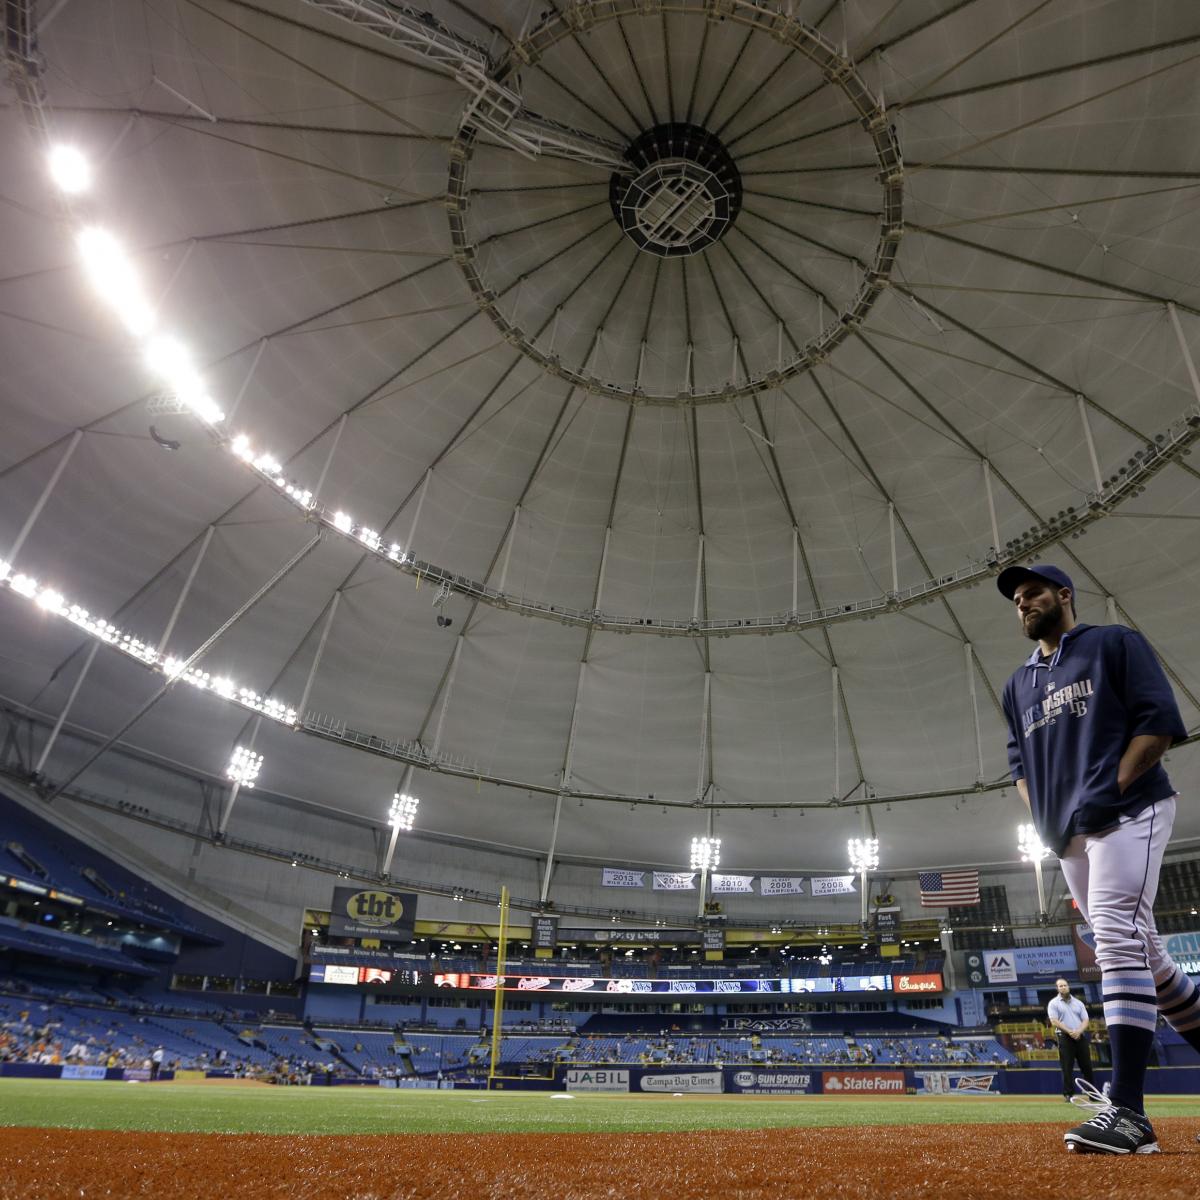 The history of the Rays stadium search and what happens next